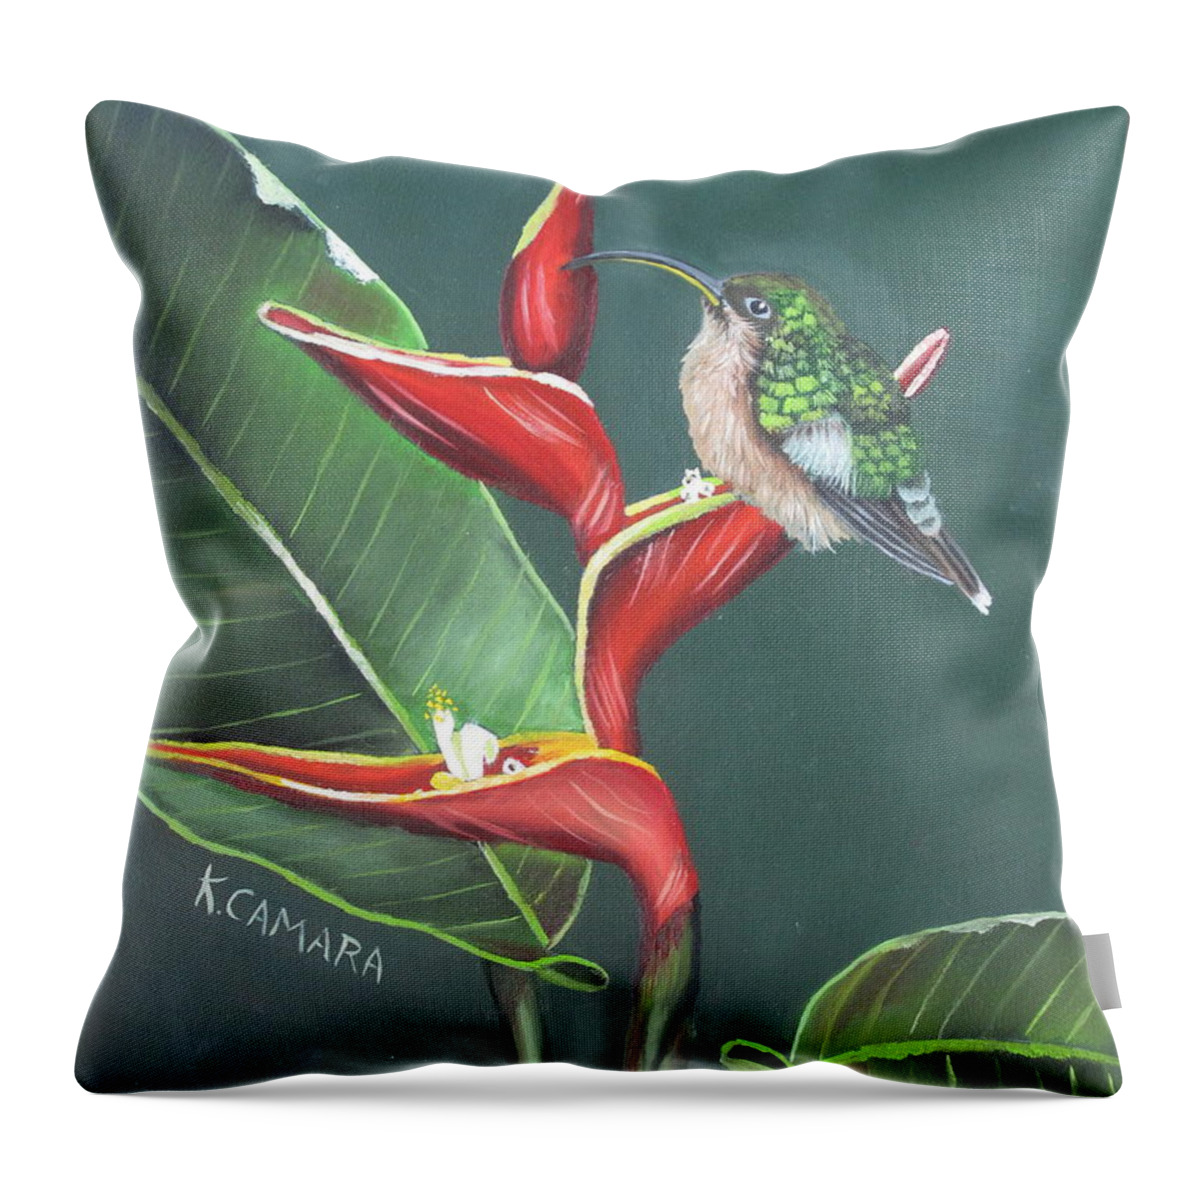 Landscape Throw Pillow featuring the painting Hummingbird by Kathie Camara